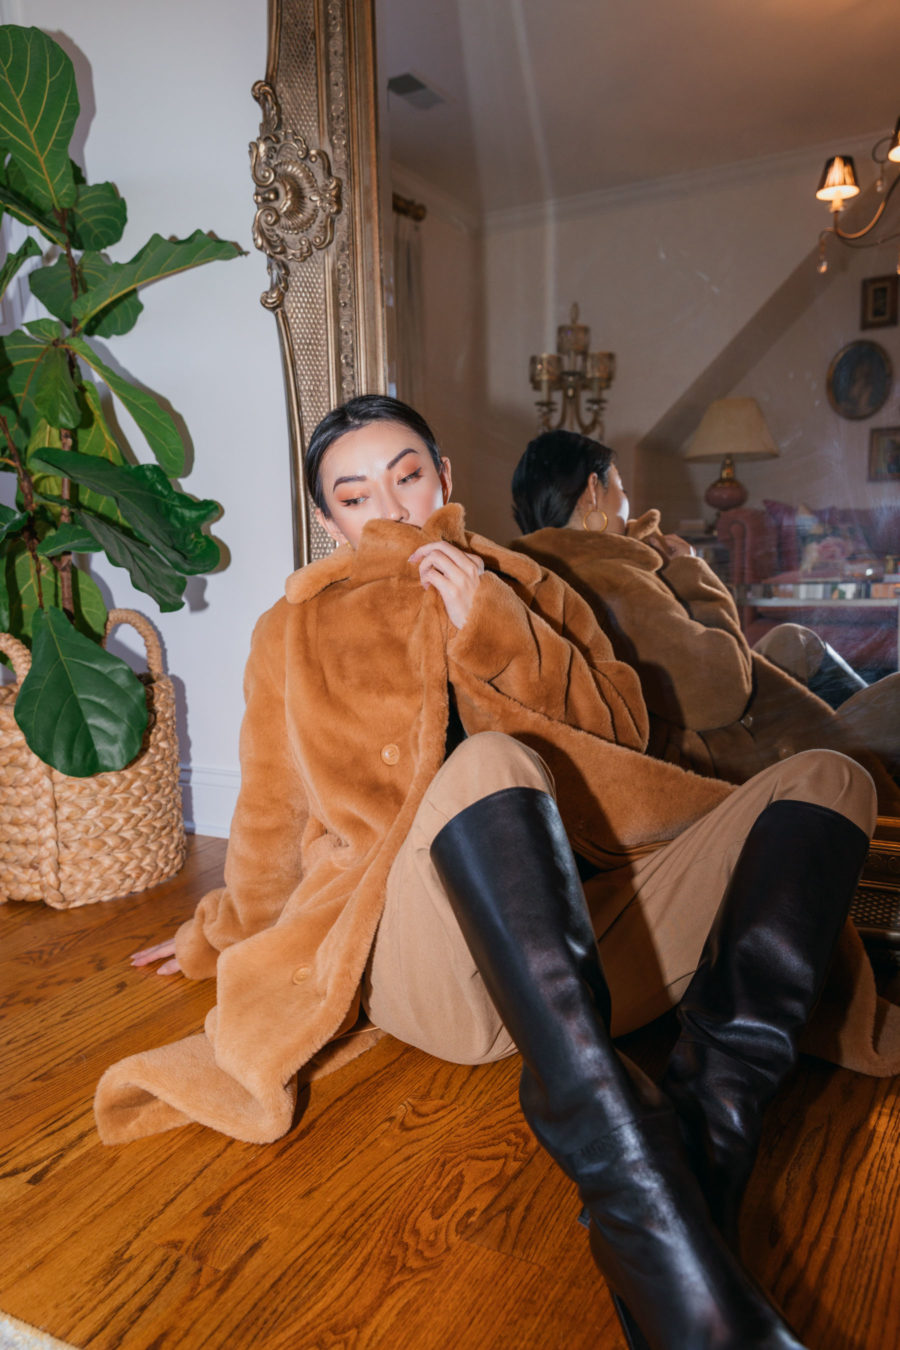 jessica wang wearing a faux fur coat in front of a large gold mirror while sharing trendy decor items for the home // Jessica Wang - Notjessfashion.com